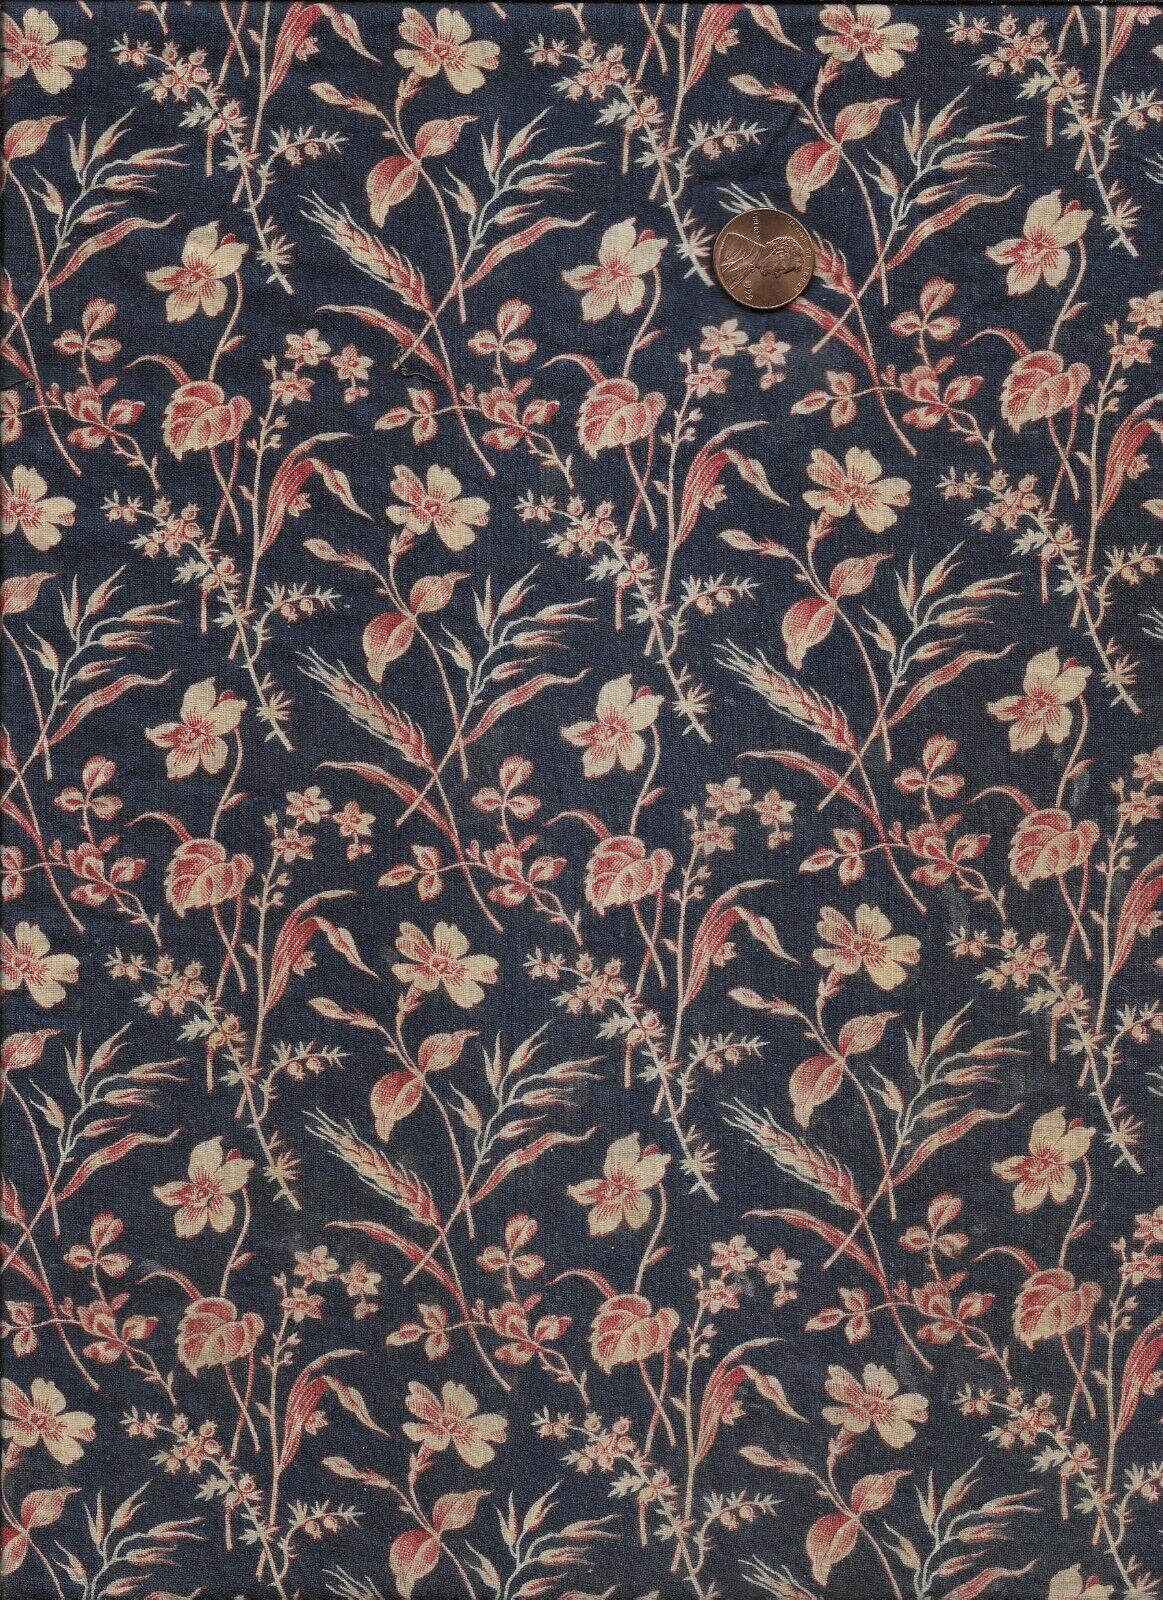 Antique 1900 Wild Grass and Flowers Fabric